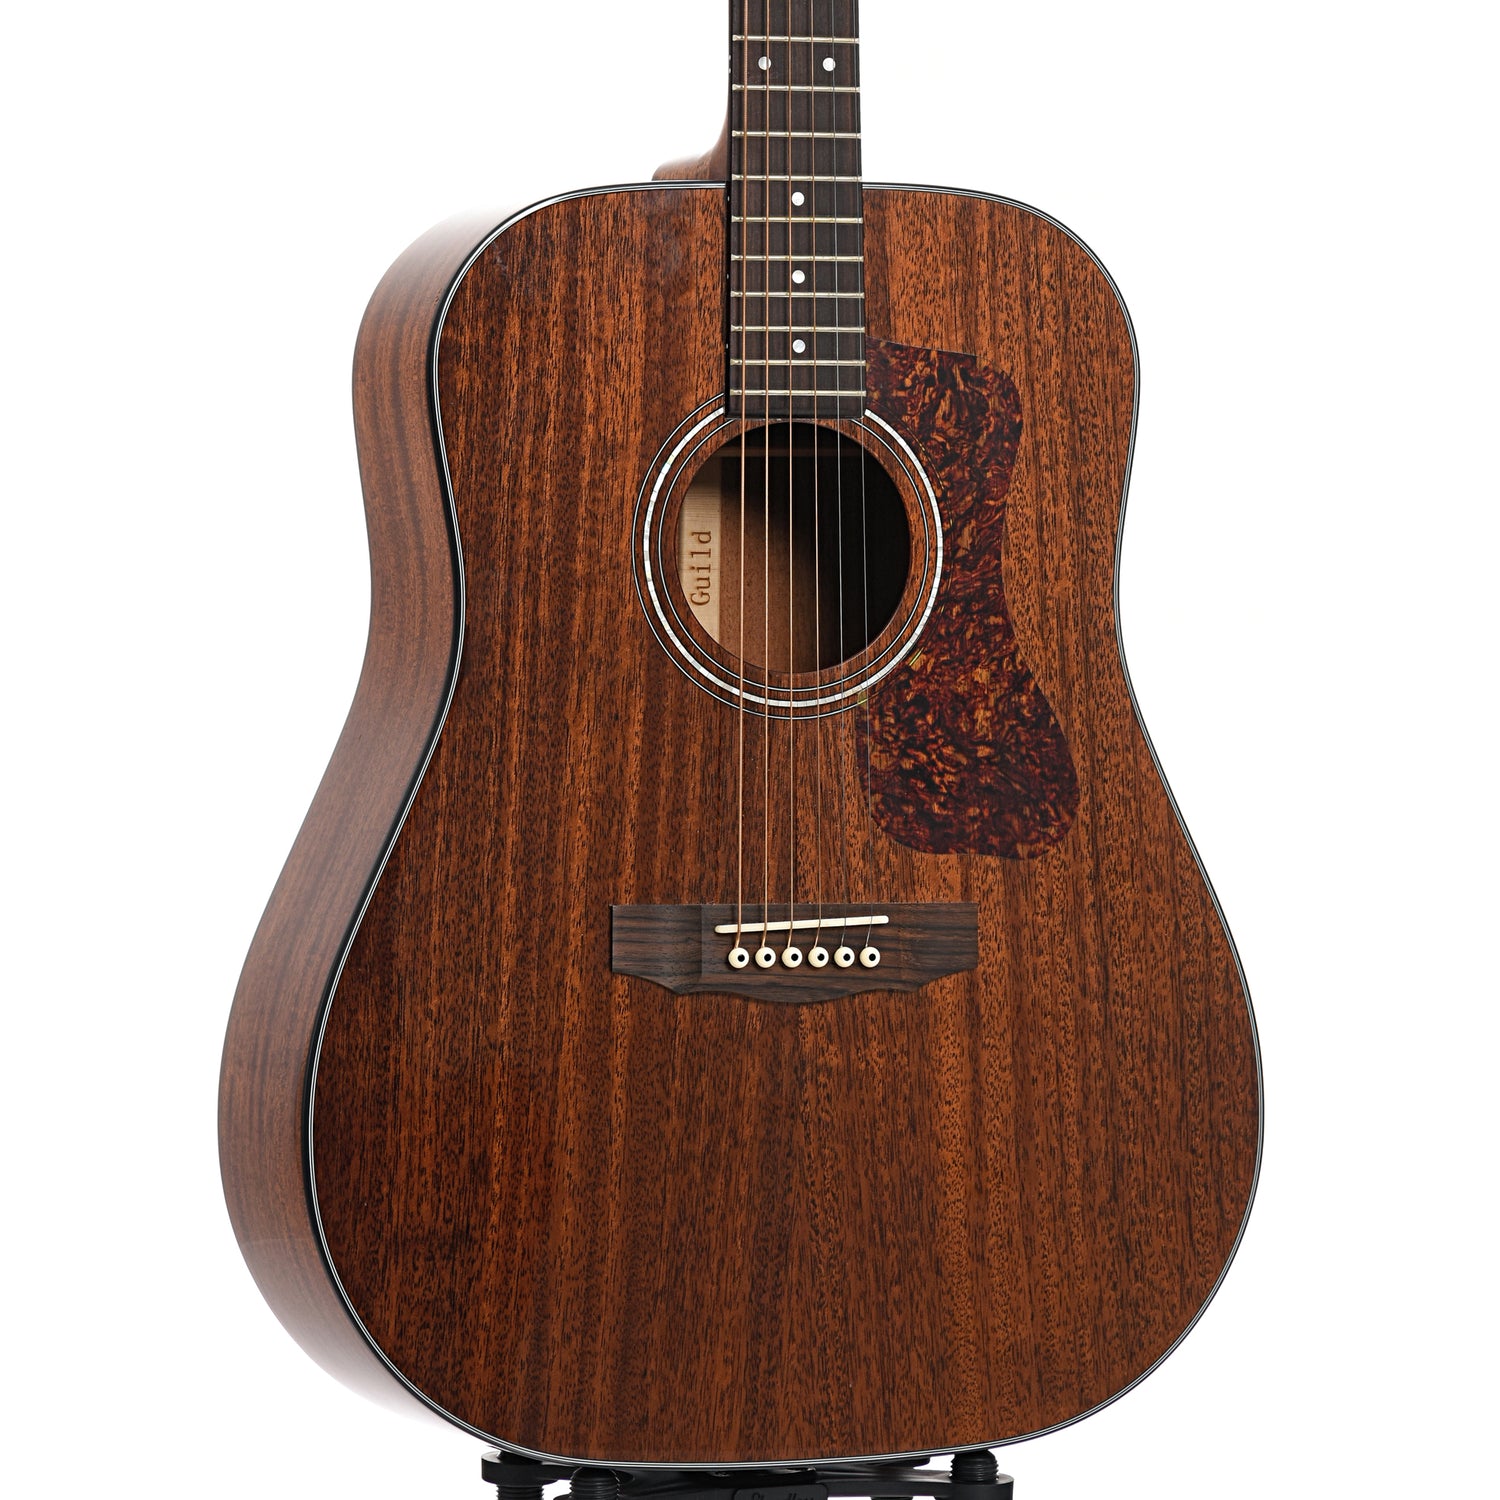 Front and side of Guild D-120 Acoustic